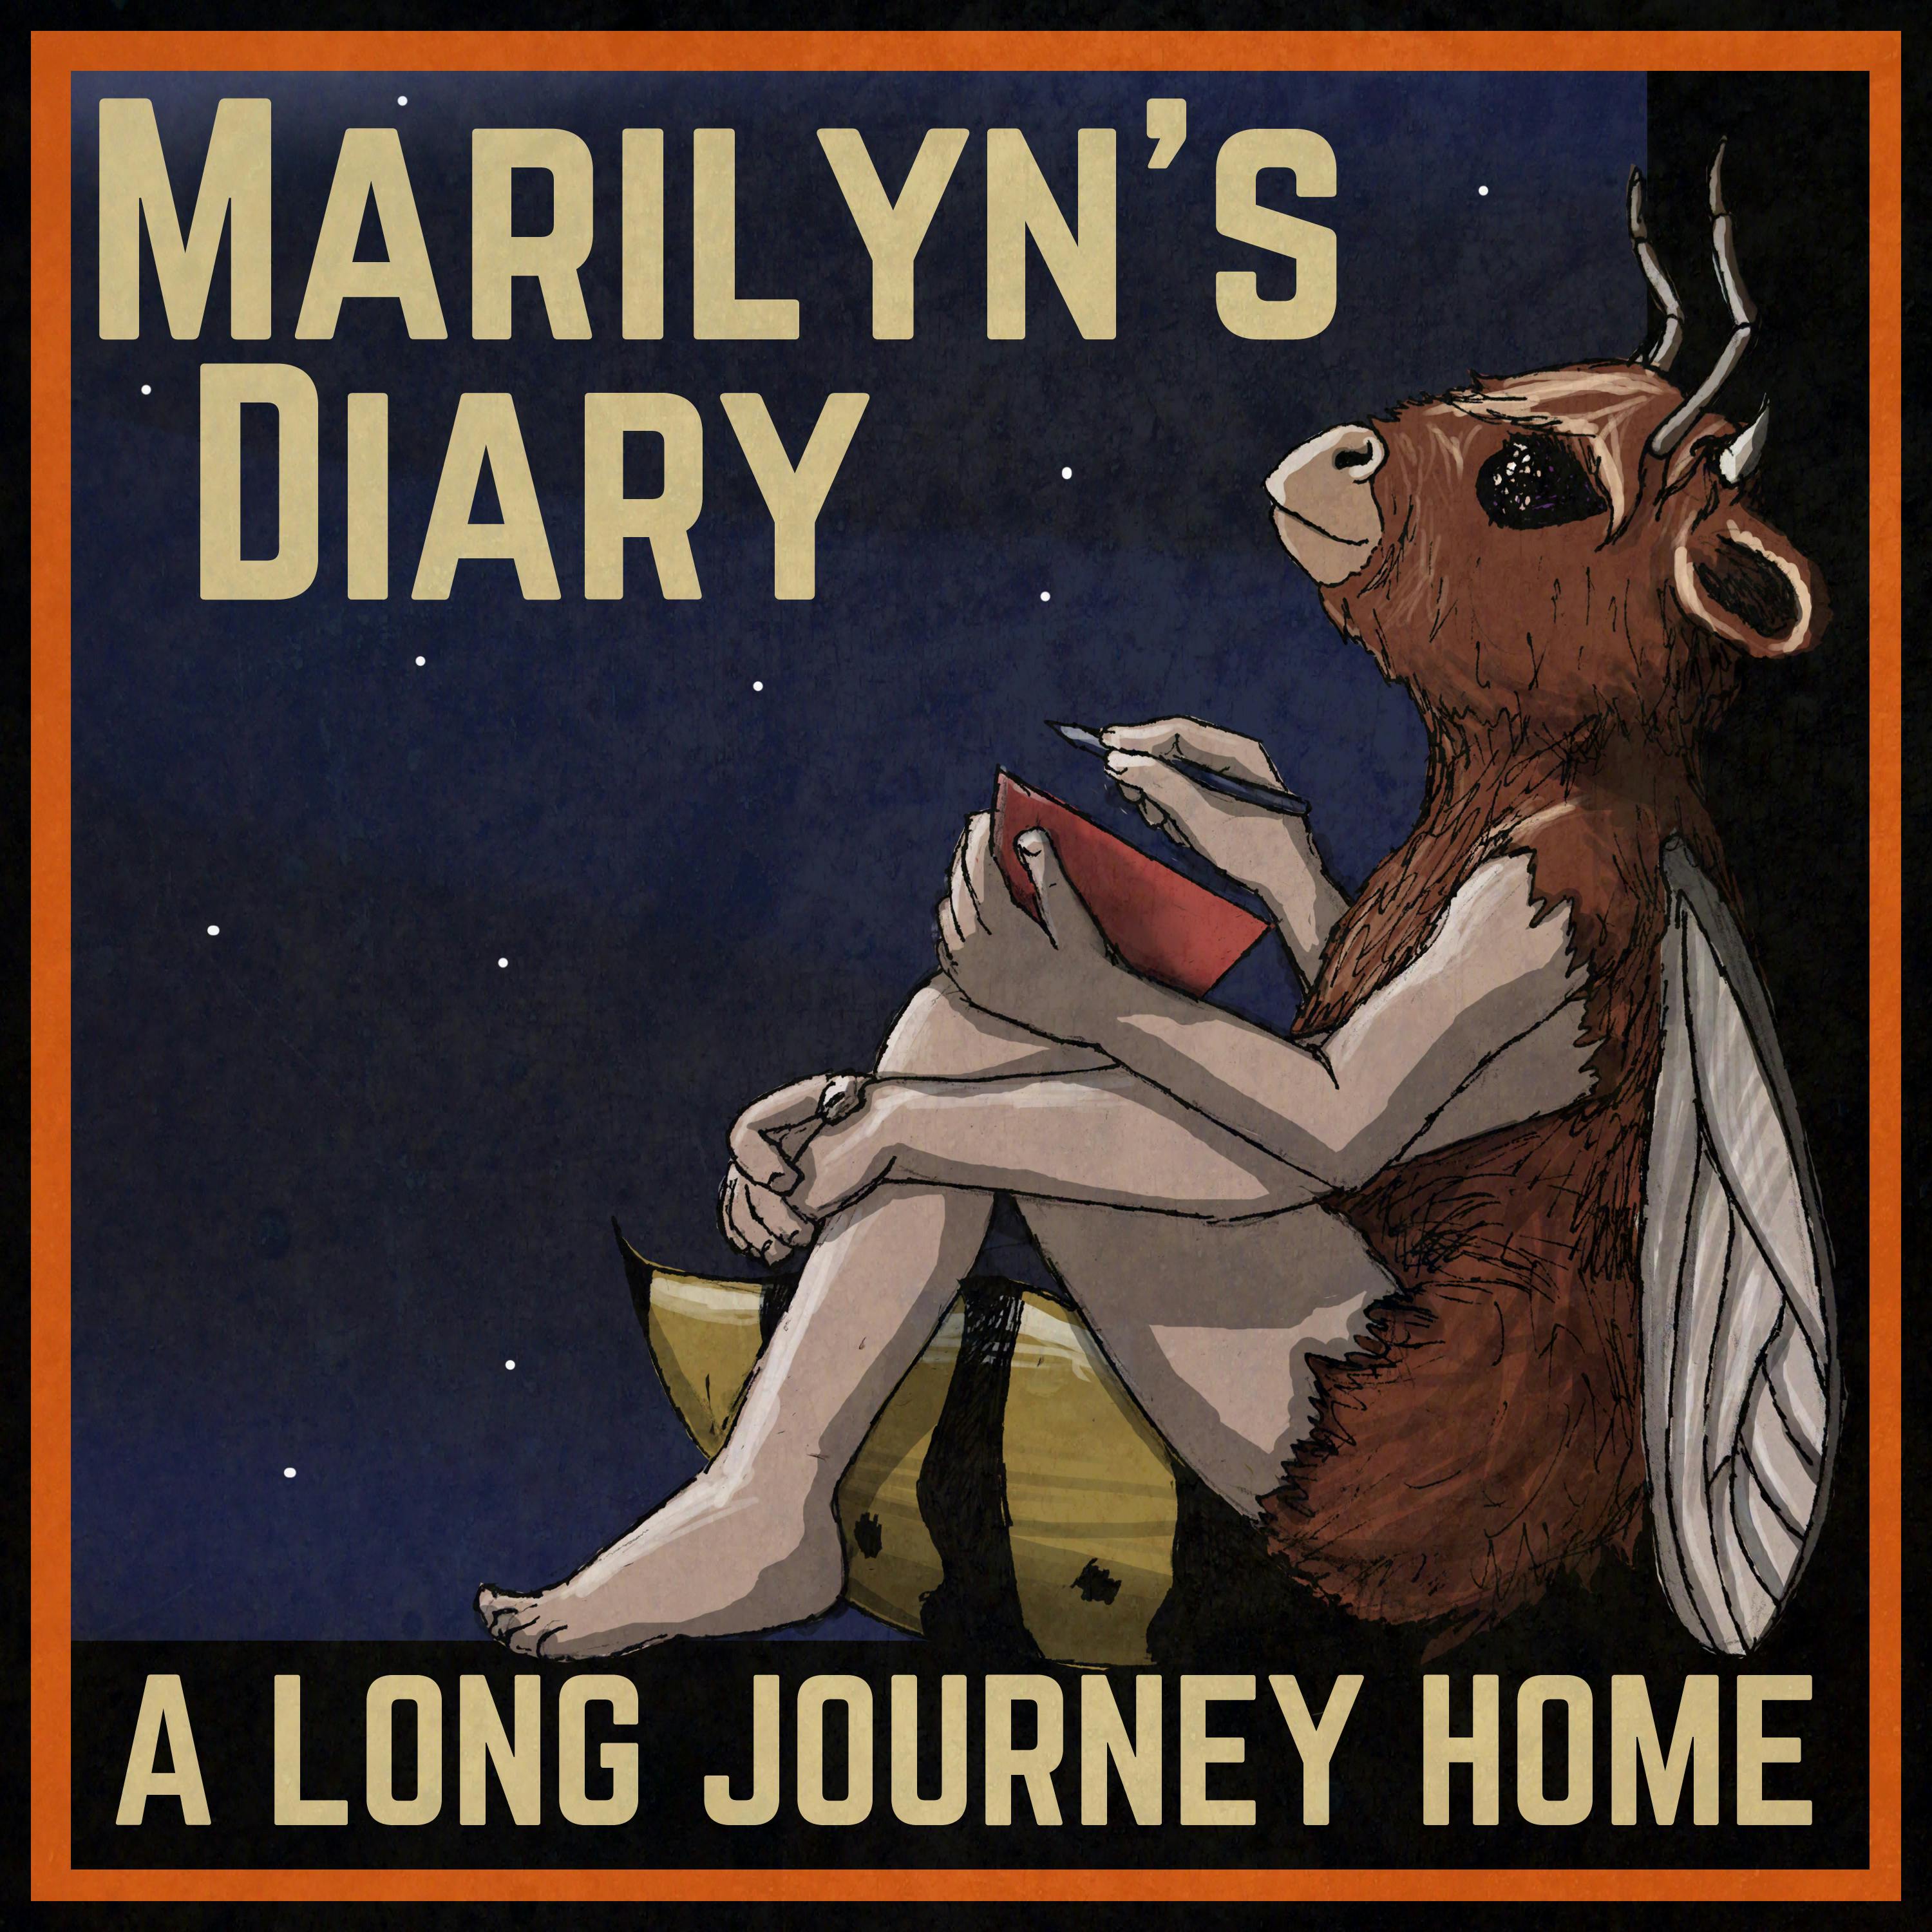 Marilyn's Diary: A Long Journey Home - E03